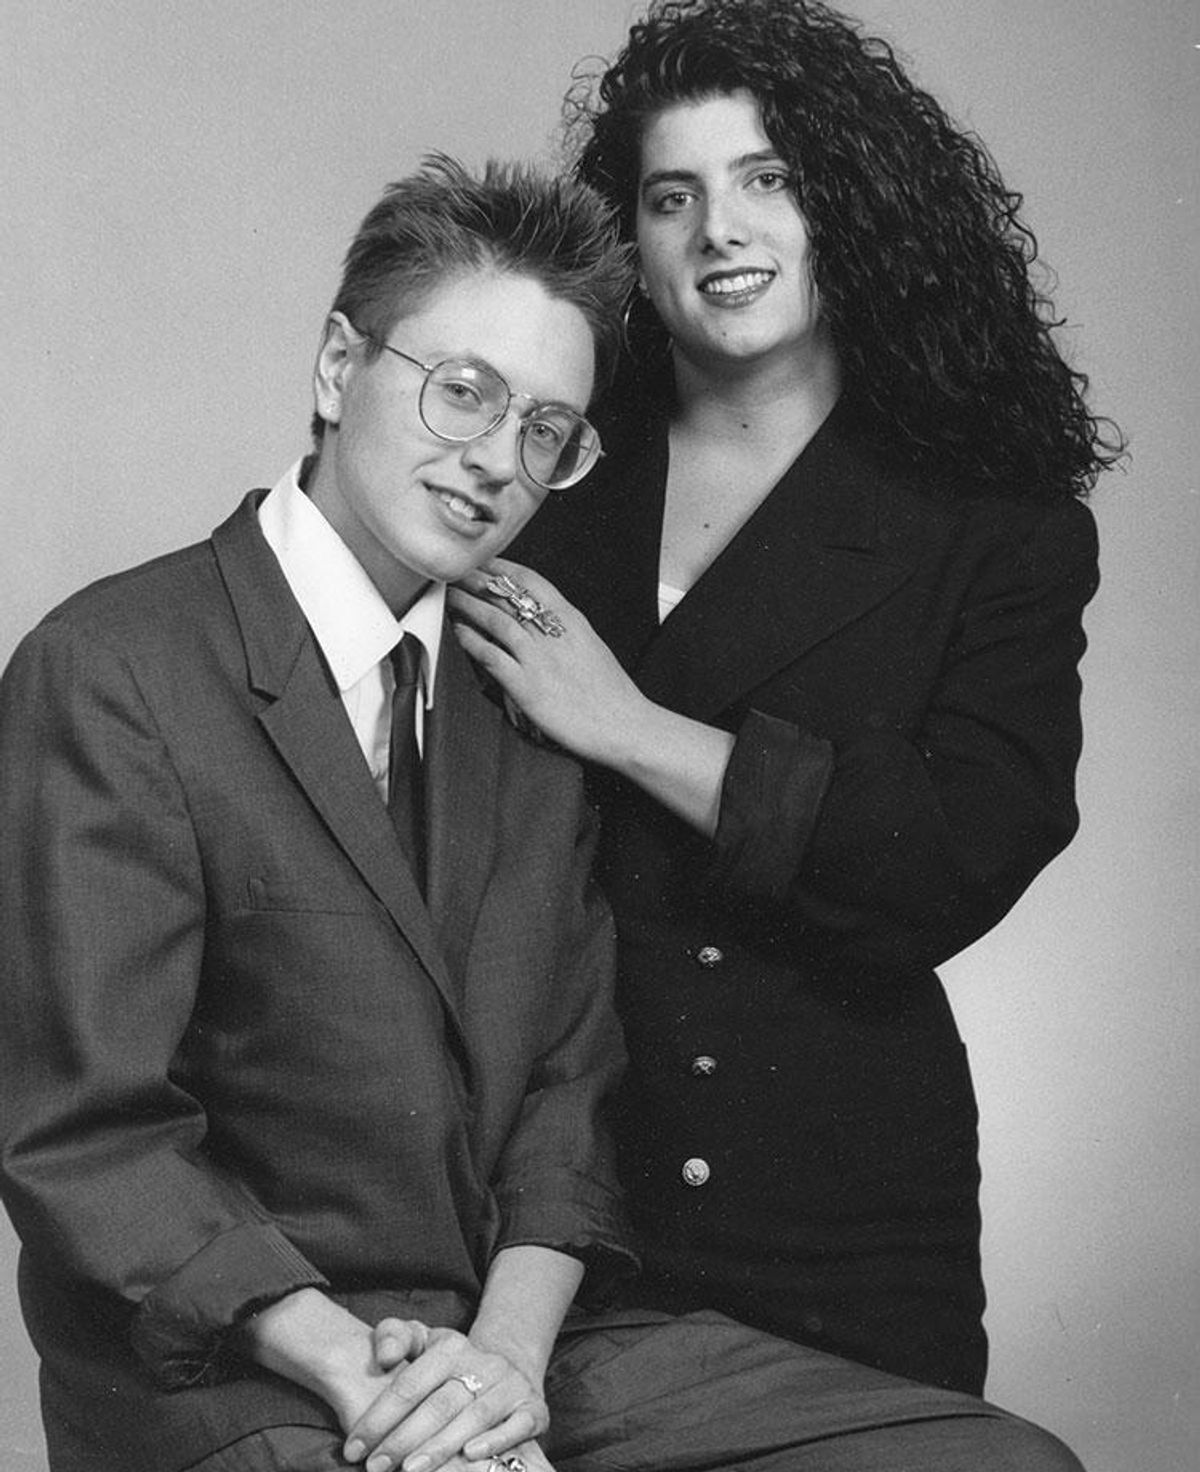 Our first engagement photo in 1992